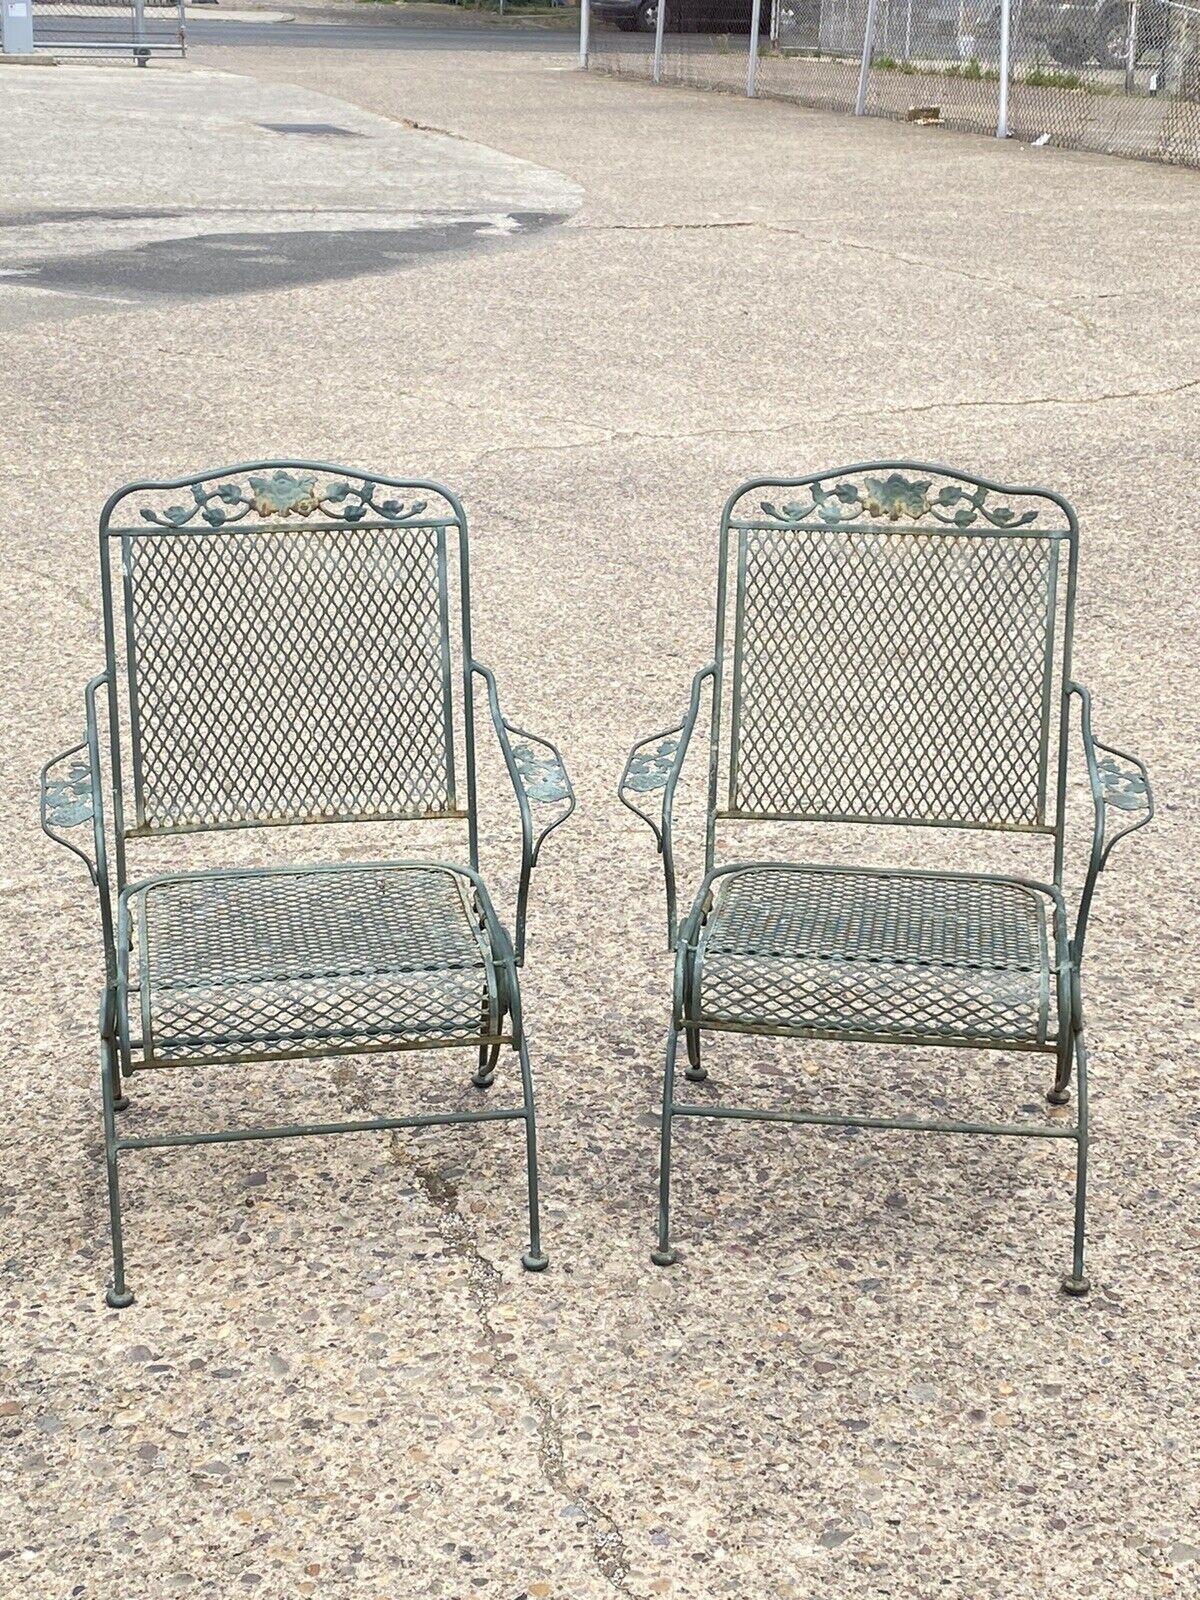 Vintage Byadowcraft Dogwood Green Wrought Iron Outdoor Patio Coil Spring Chairs - a Pair. Circa Mid to Late 20th Century. Dimensions : 38